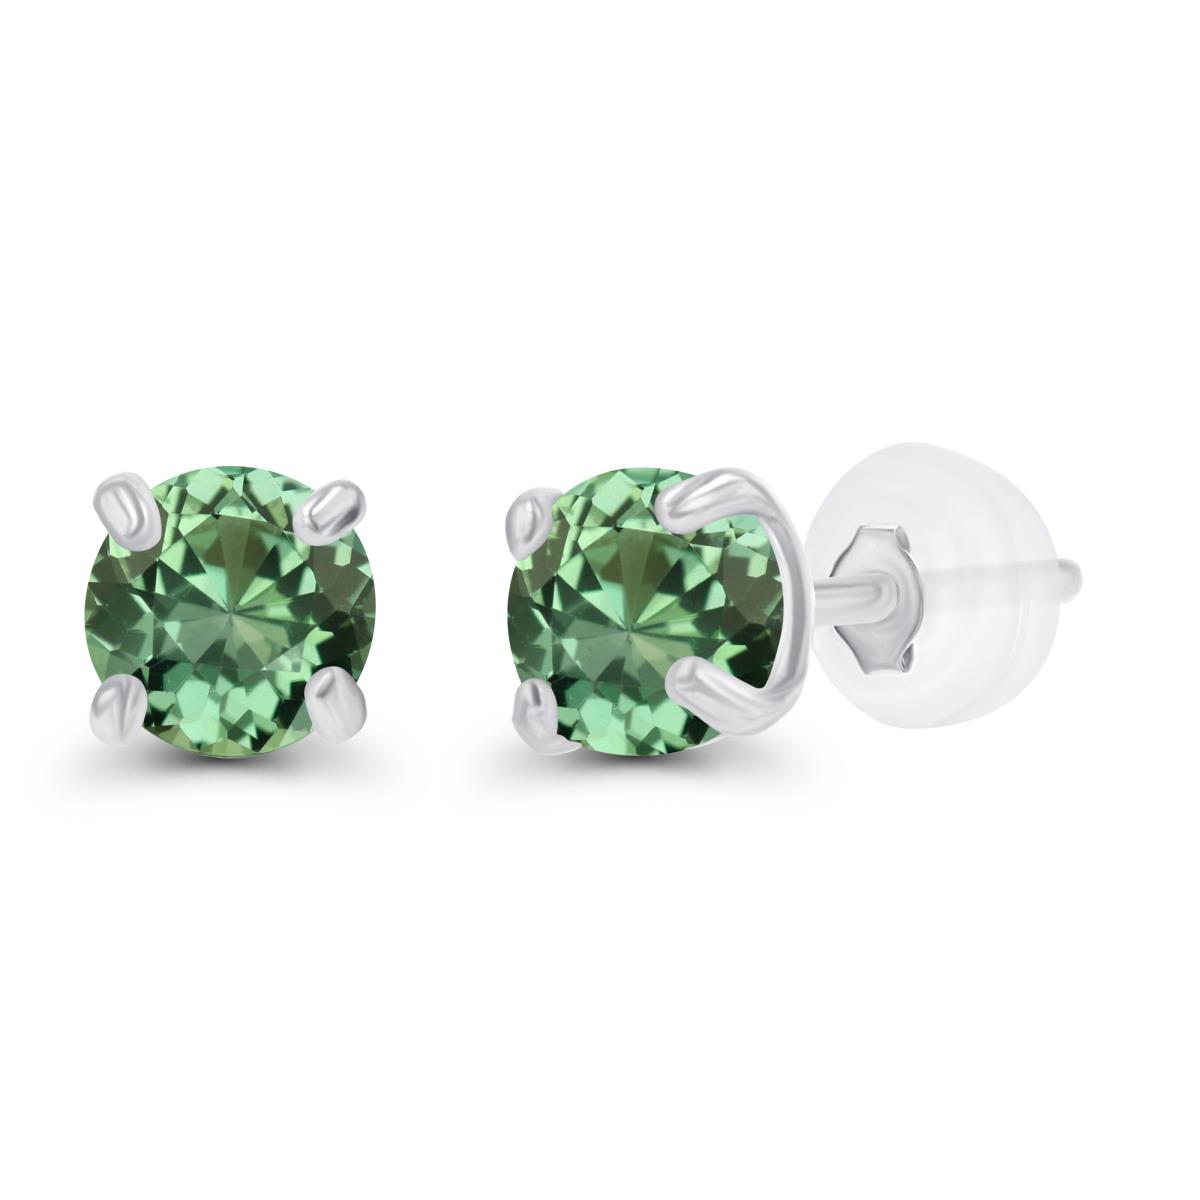 10K White Gold 3mm Round Cr Green Sapphire Stud Earring with Silicone Back